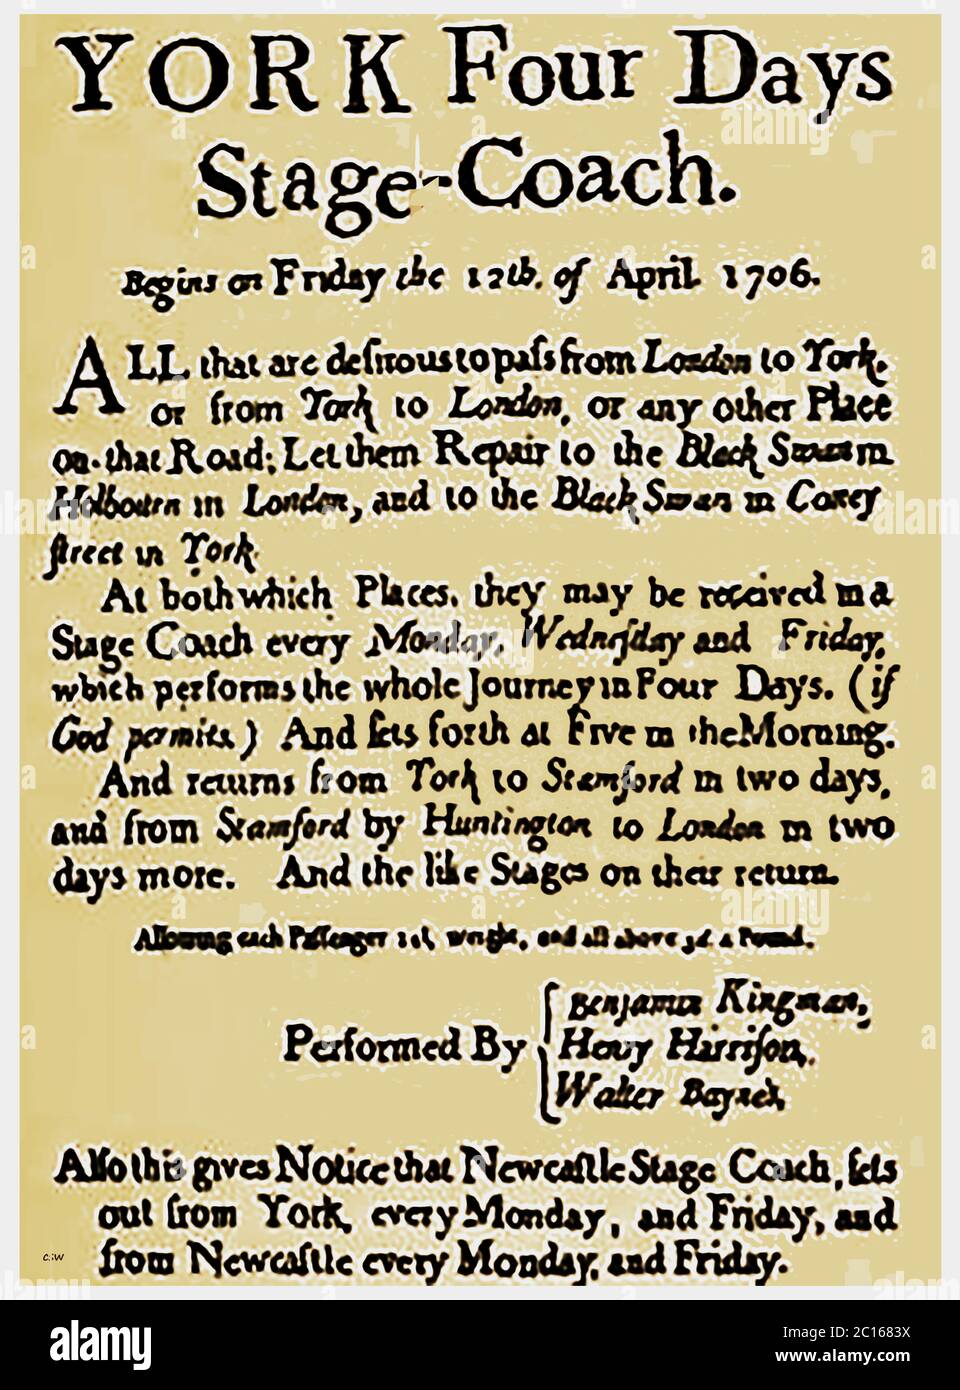 An old  English stage coach poster from 1706 listing the towns and inns served, namely -  London;York;Black Swan, Holborn ; Black swan, Coney Street, York; Stamford;Huntington. Drivers were Benjamin Kingman; Henry Harrison and Walter Baynes. A note also mentions the Newcastle Stage Coach which ran from York. Stock Photo